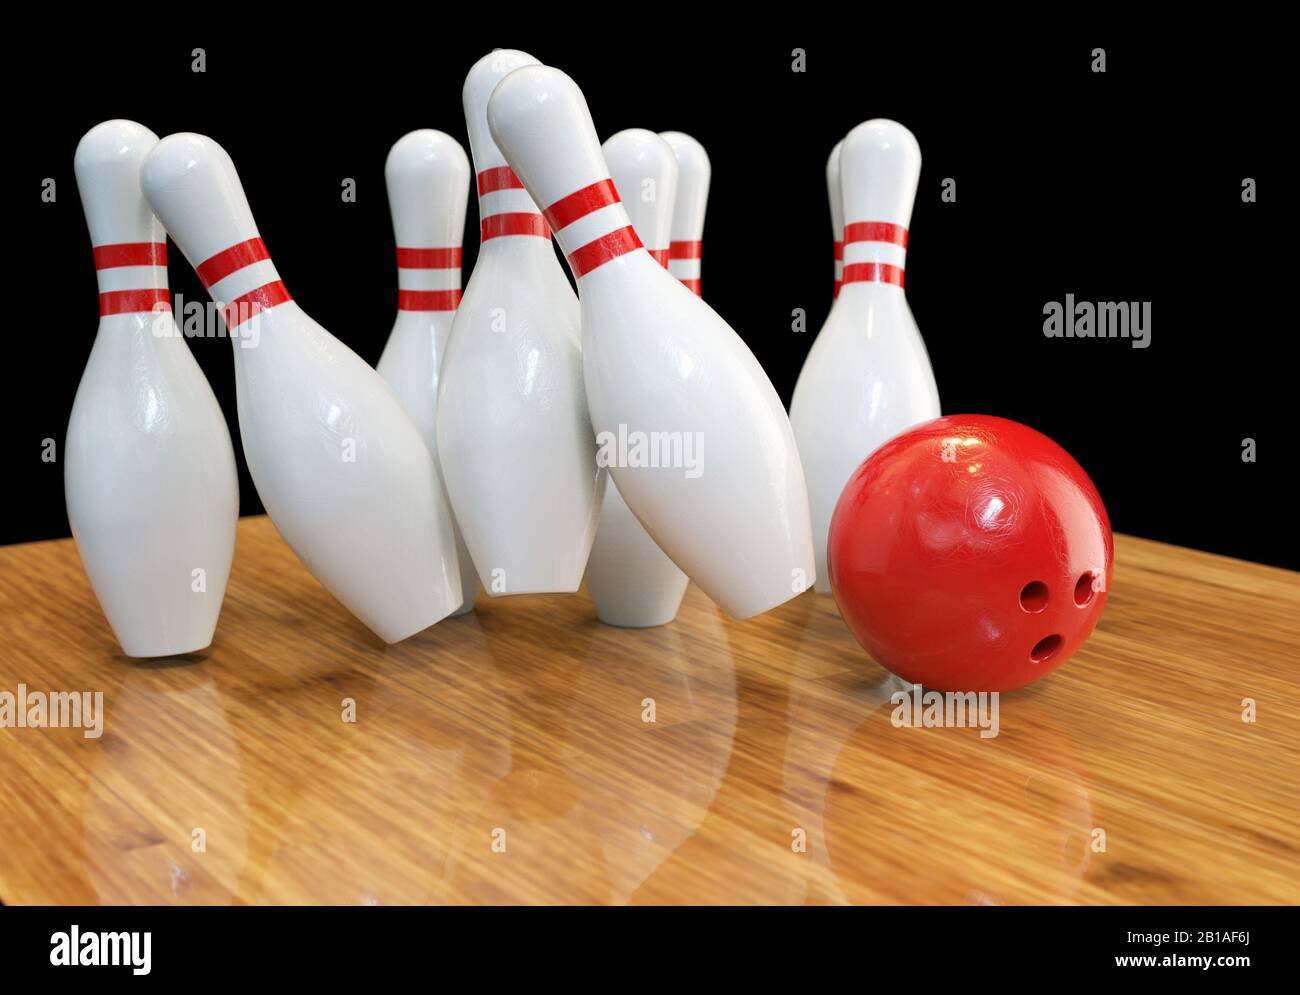 Image of scattered skittles and bowling ball on wooden floor, 3d rendering. Stock Photo